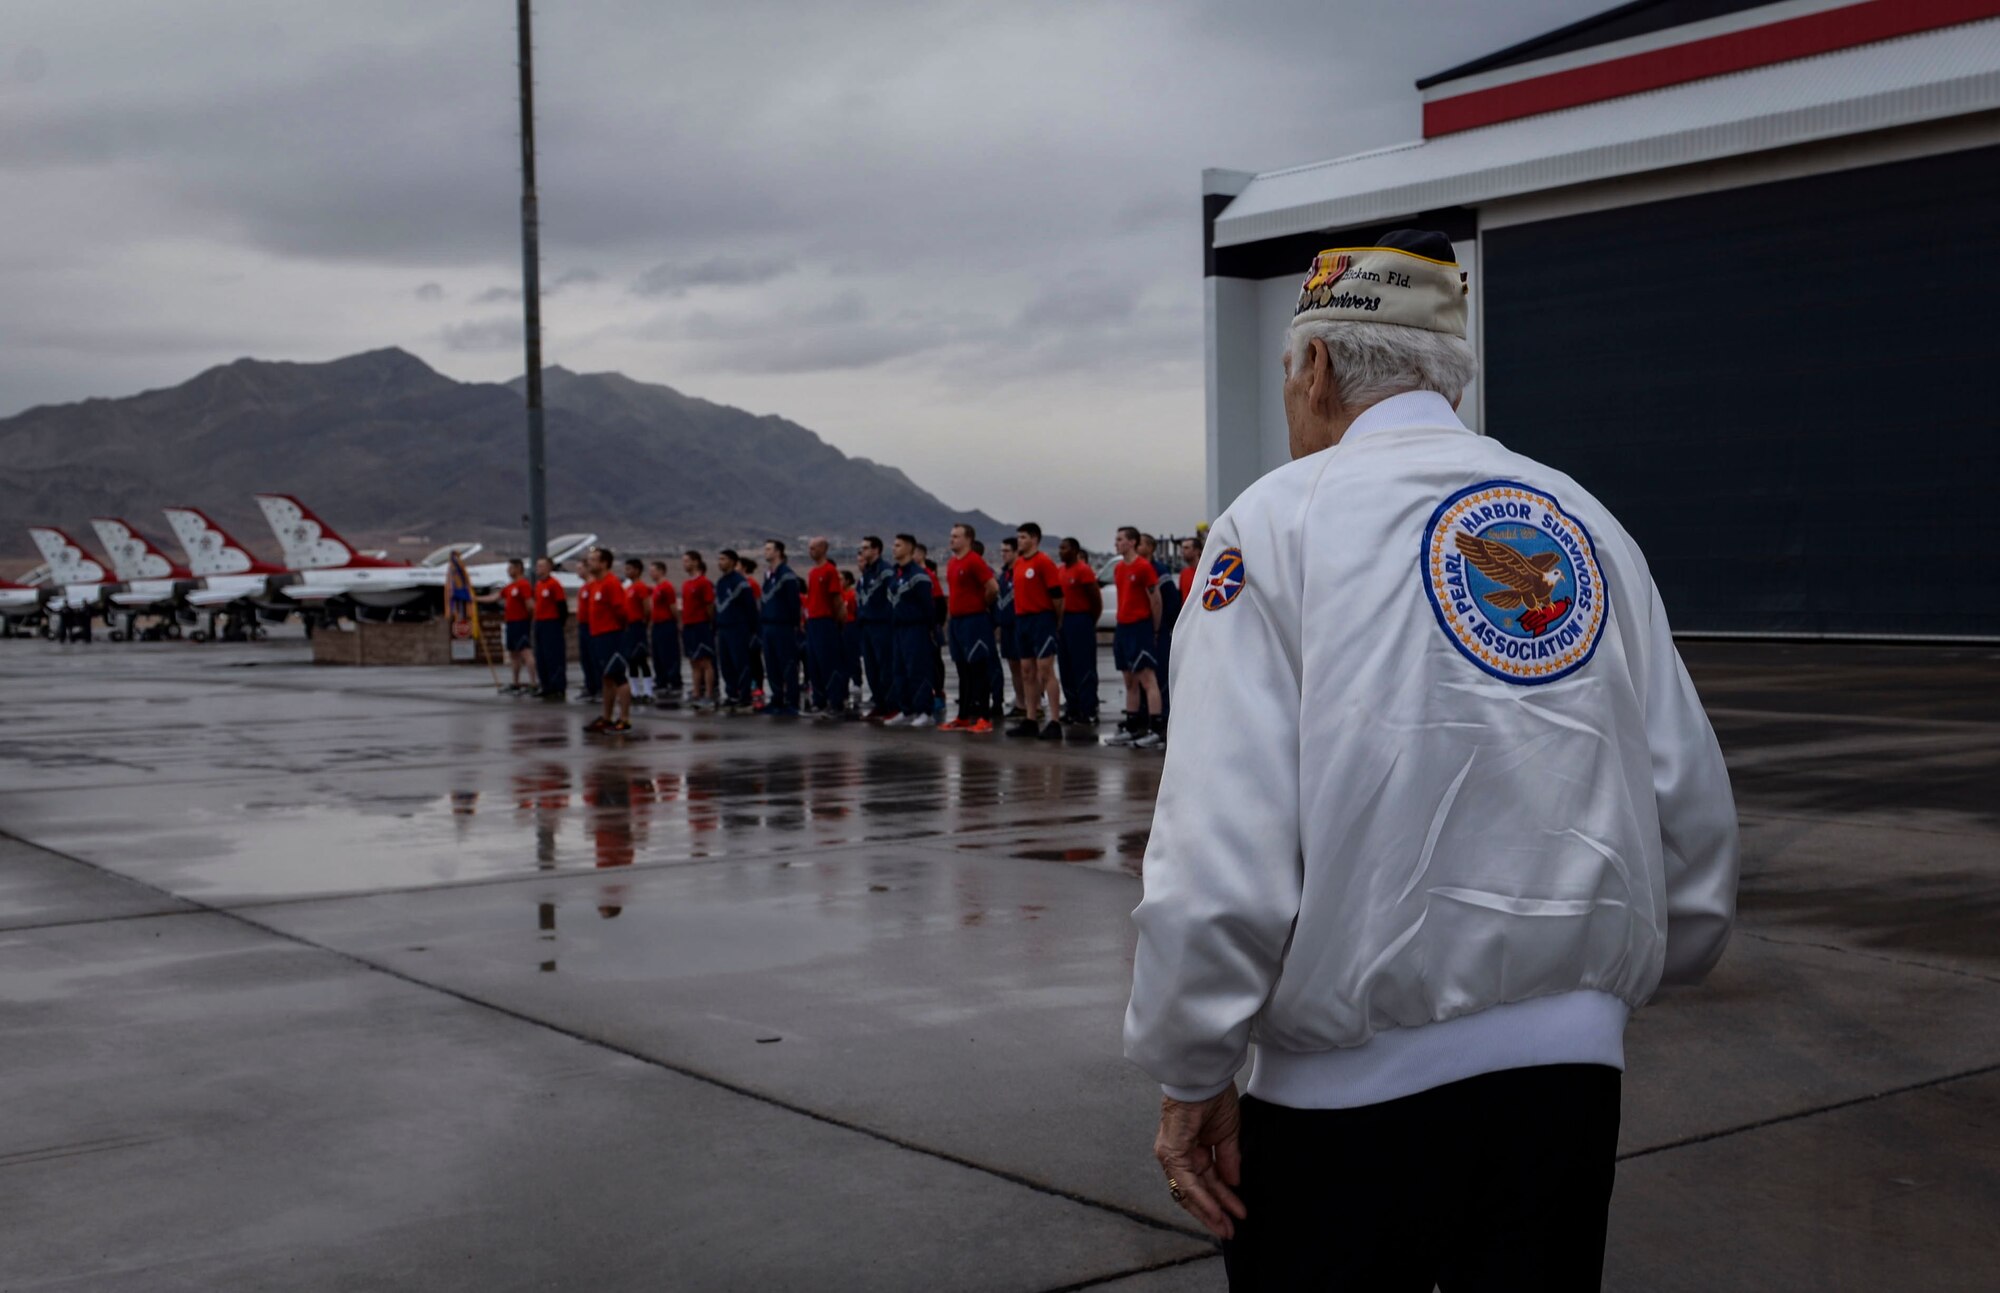 Ed Hall, Pearl Harbor Survivor, visits the Thunderbirds Hangar Dec. 7, 2018 at Nellis Air Force Base, Nevada. Hall’s stop at the hangar was one of many stops on his base tour. (U.S. Air Force photo by Airman 1st Class Bailee A. Darbasie)